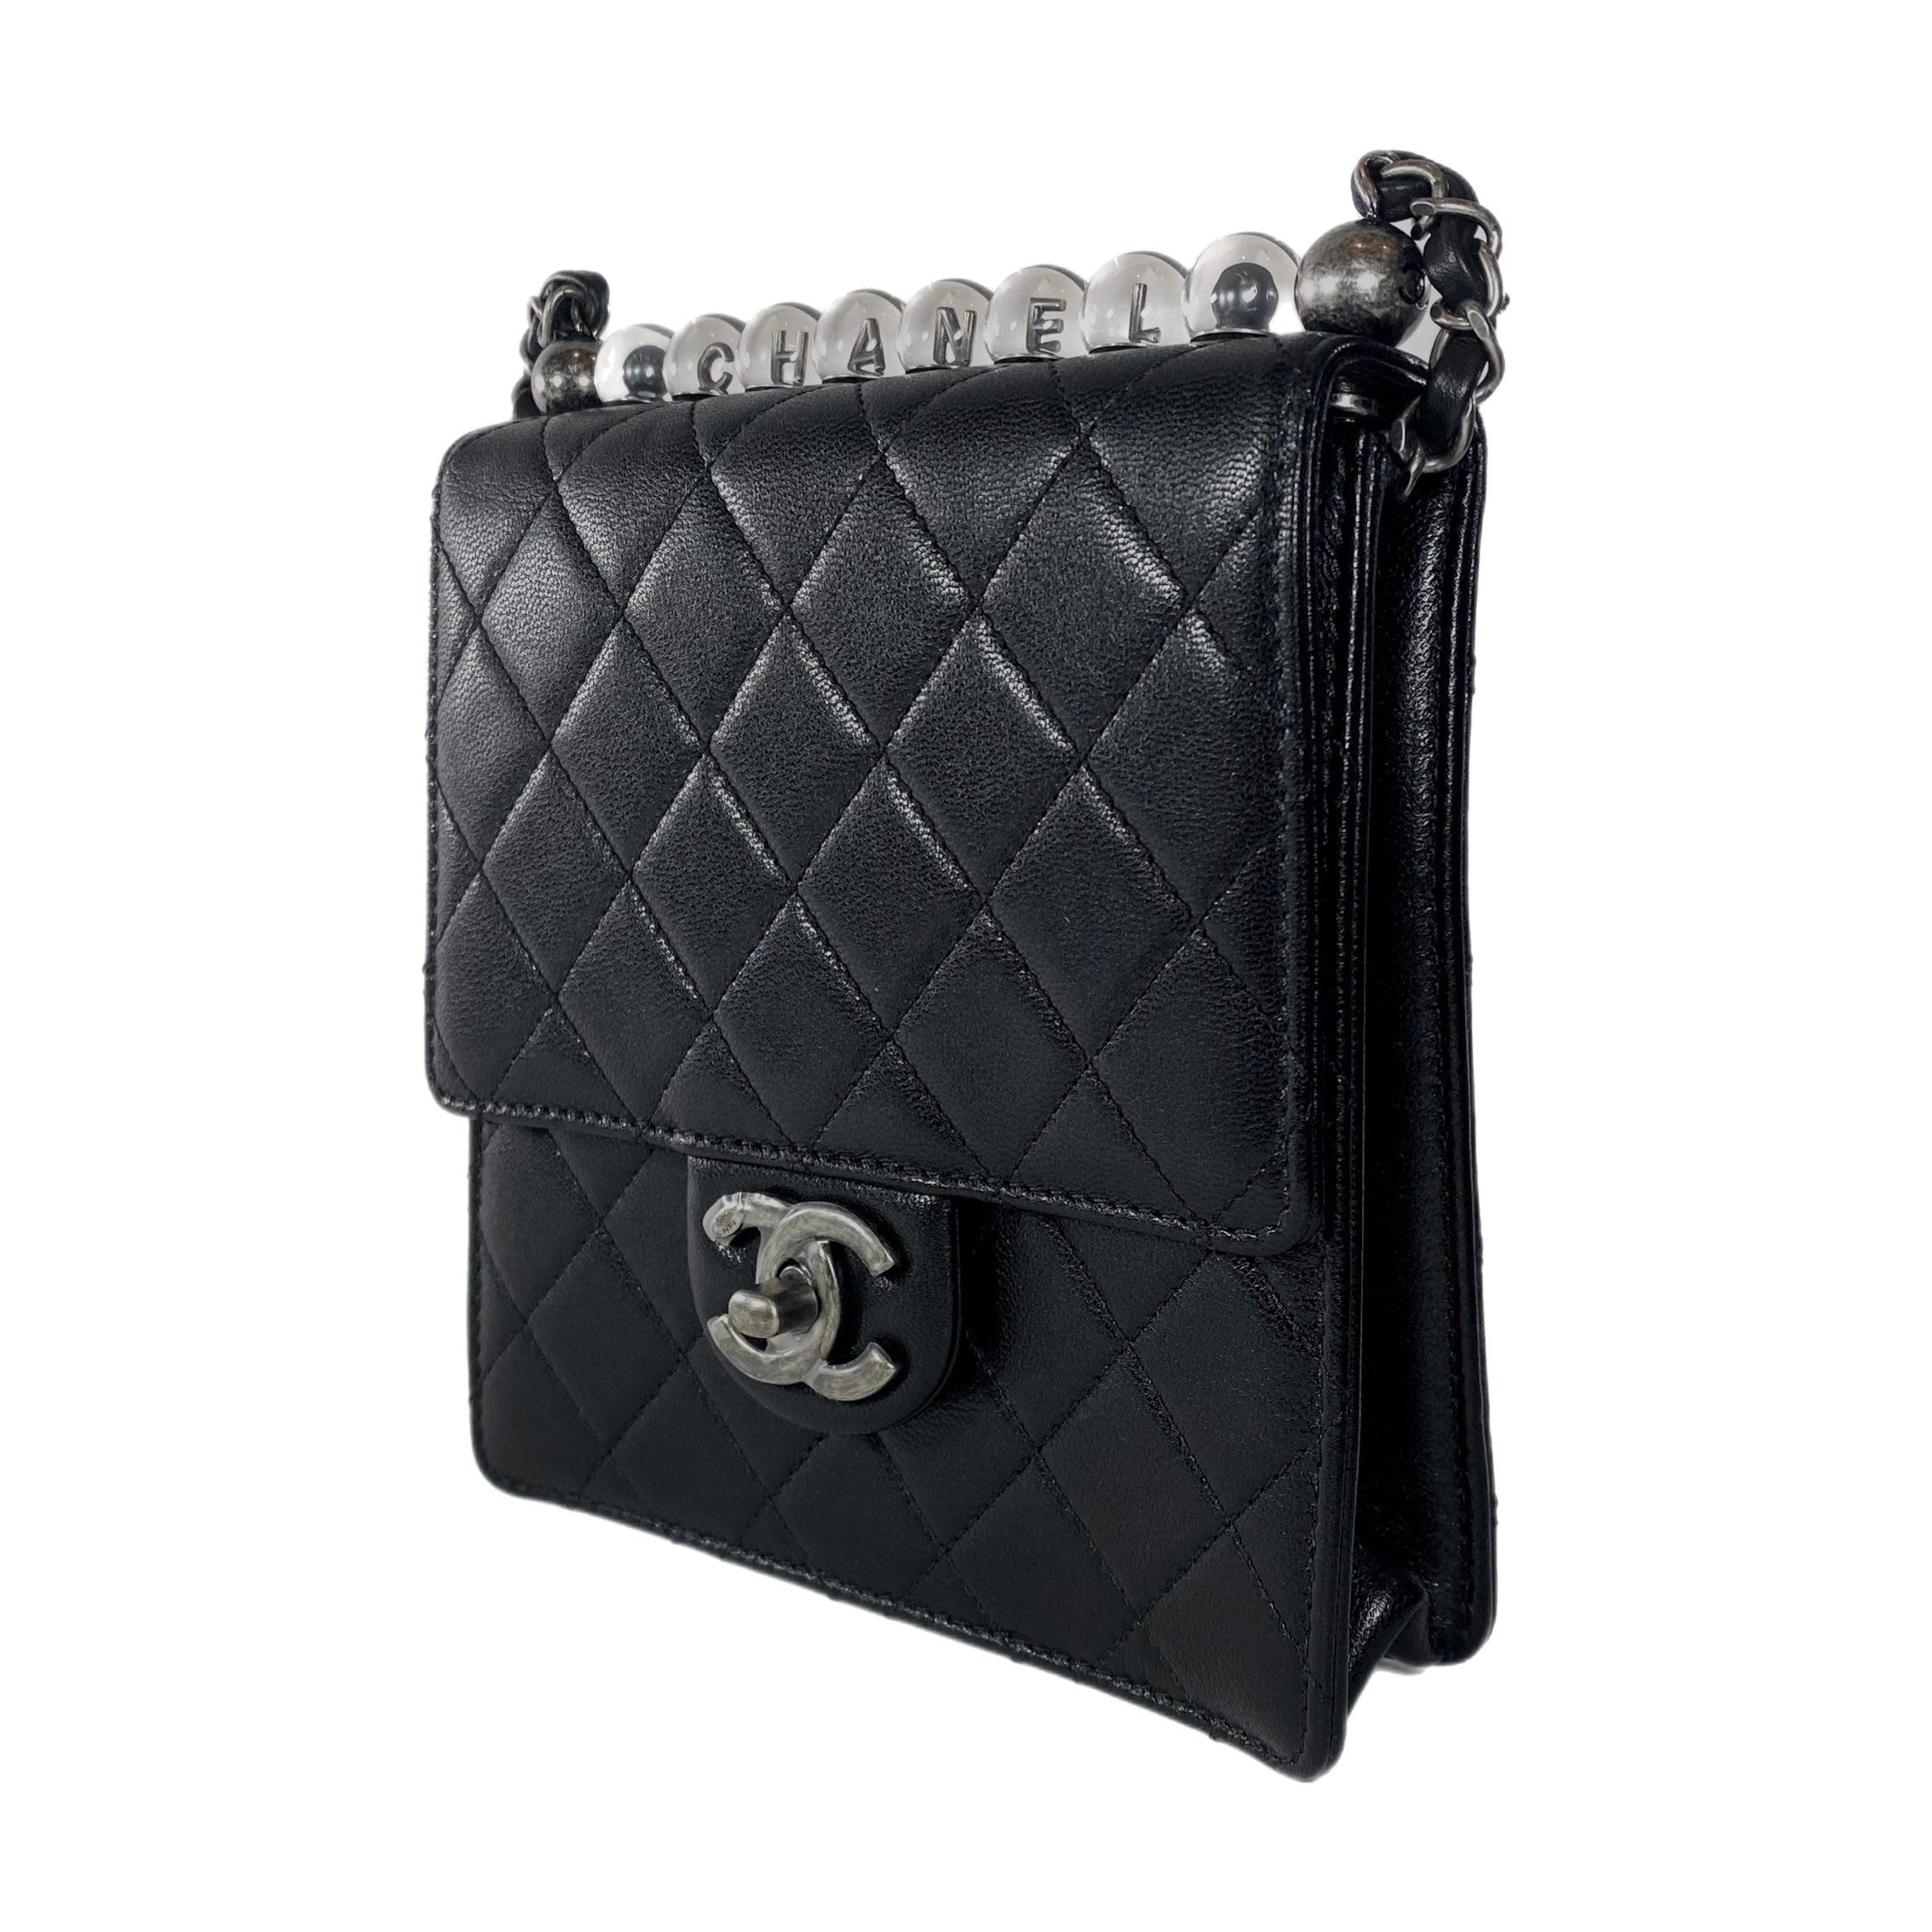 CHANEL  BLACK CHIC PEARLS SMALL FLAP BAG IN